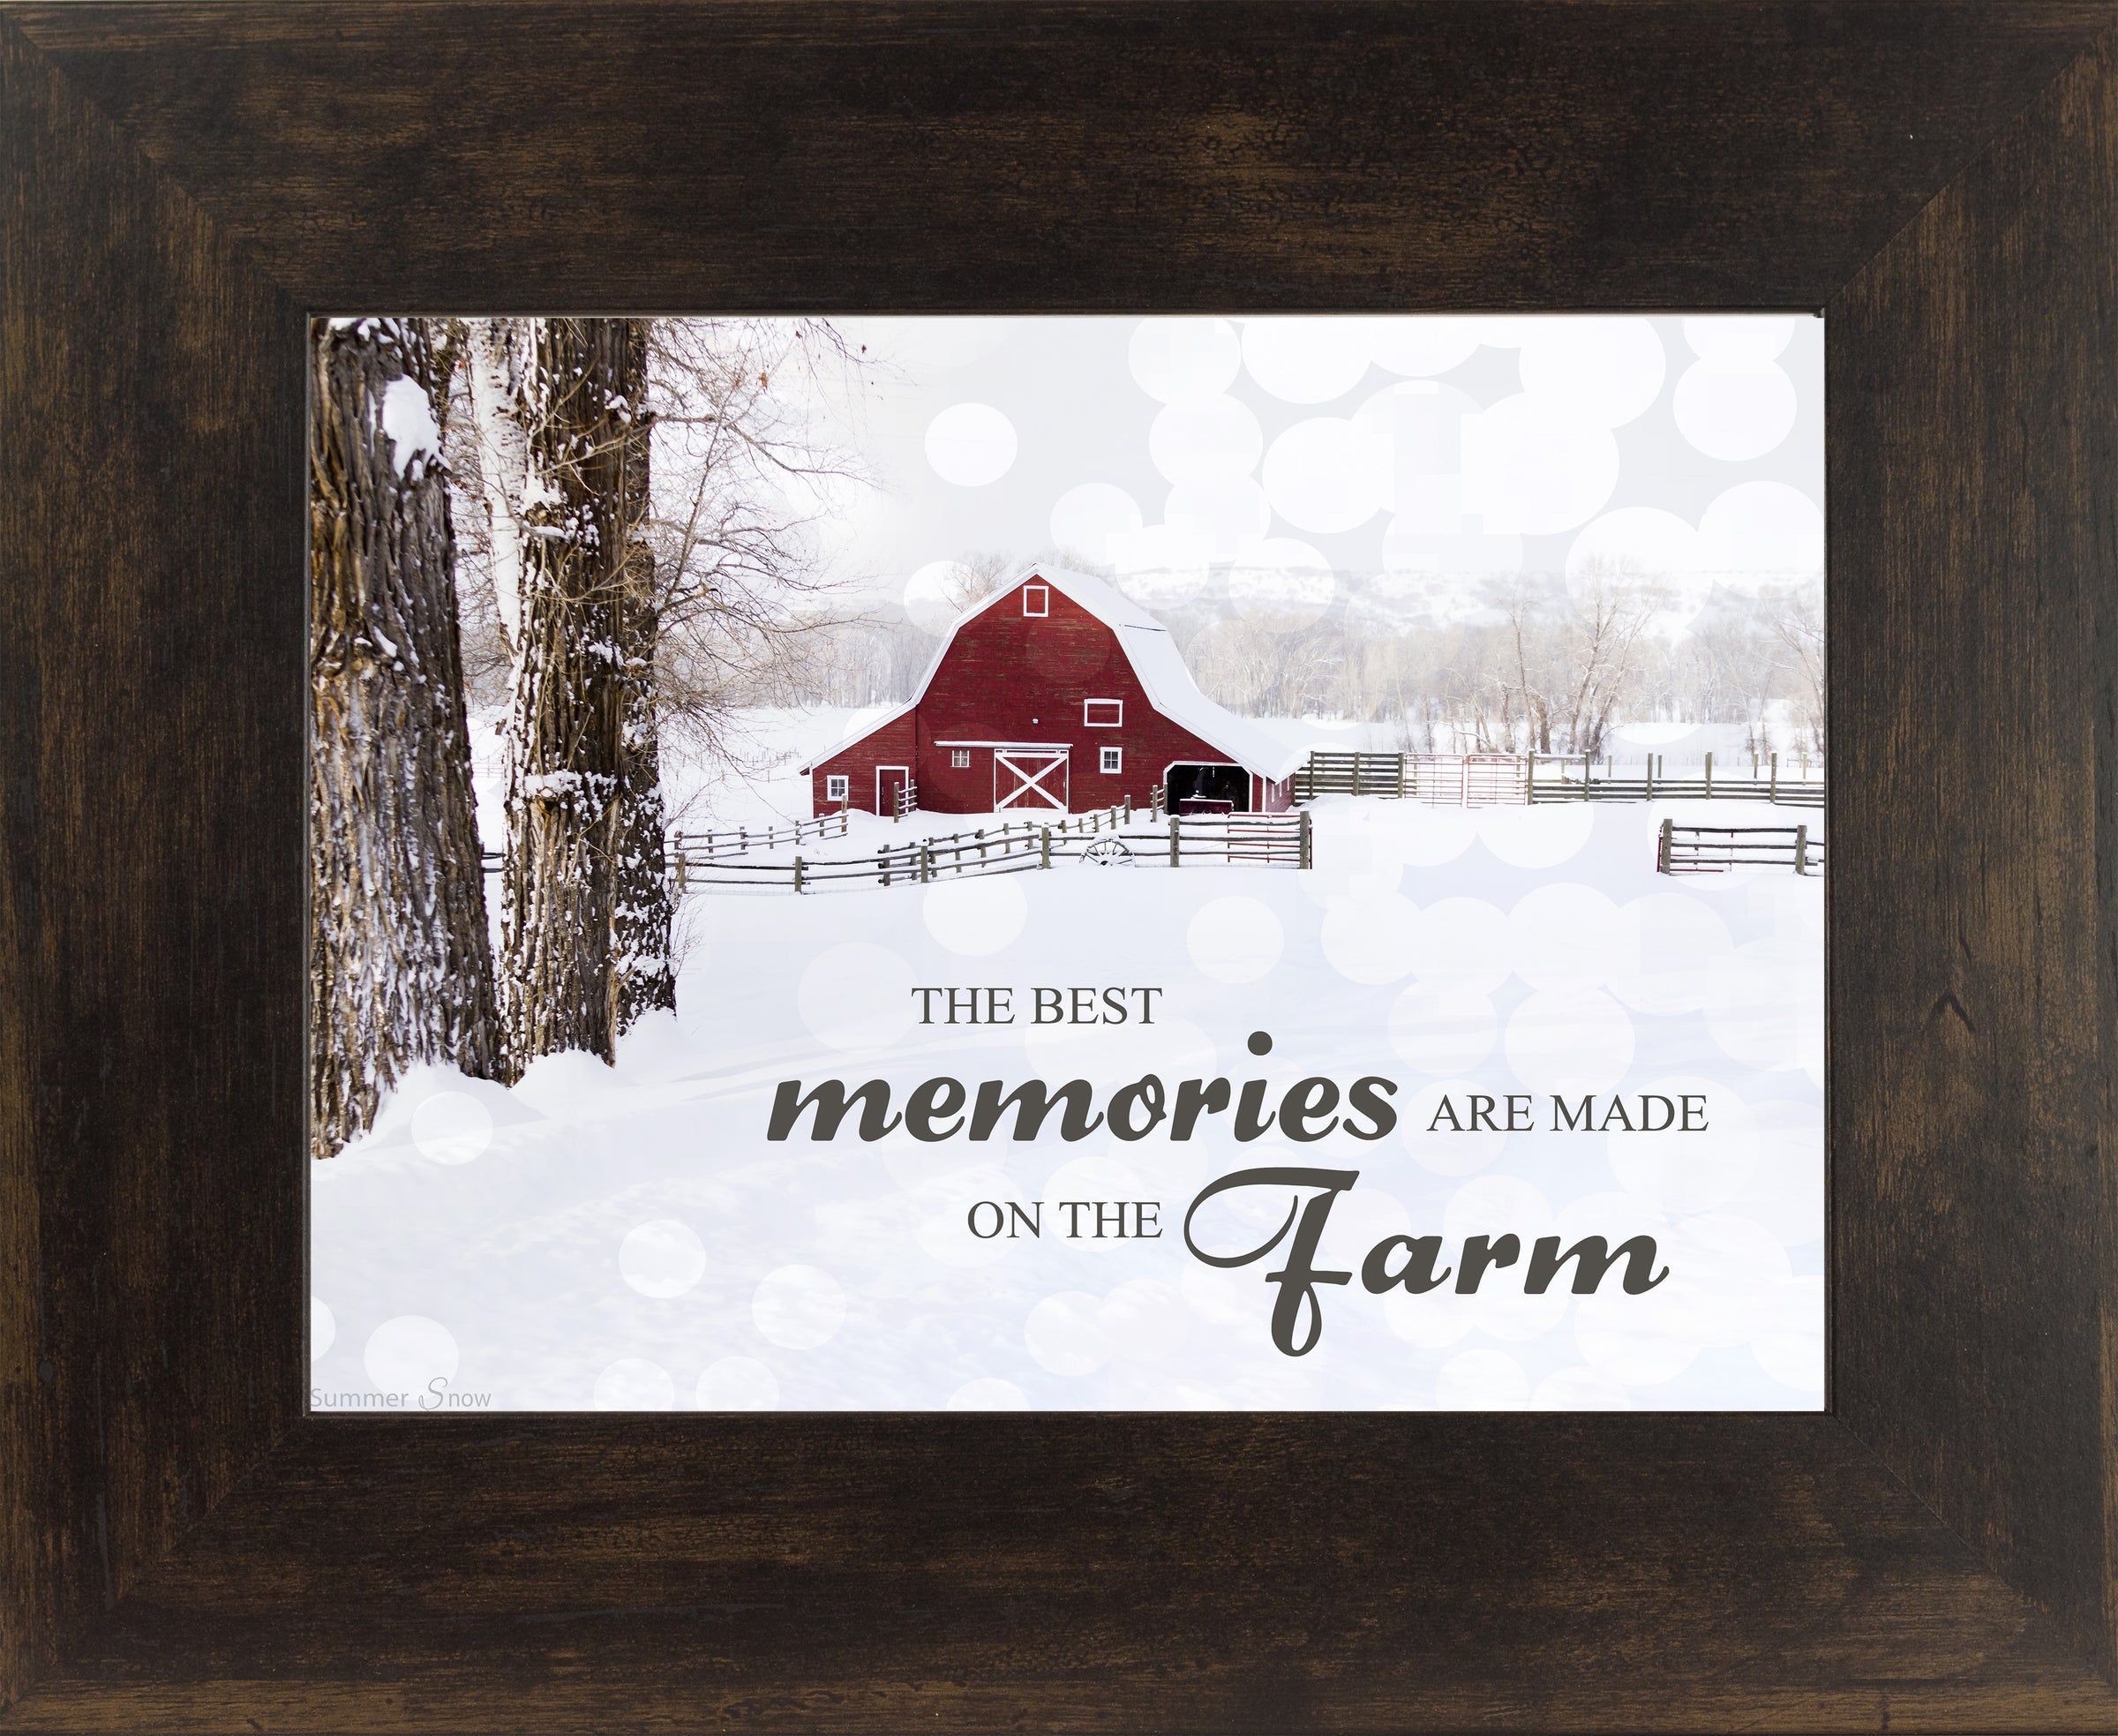 The Best Memories are Made on the Farm SSA124 - Summer Snow Art